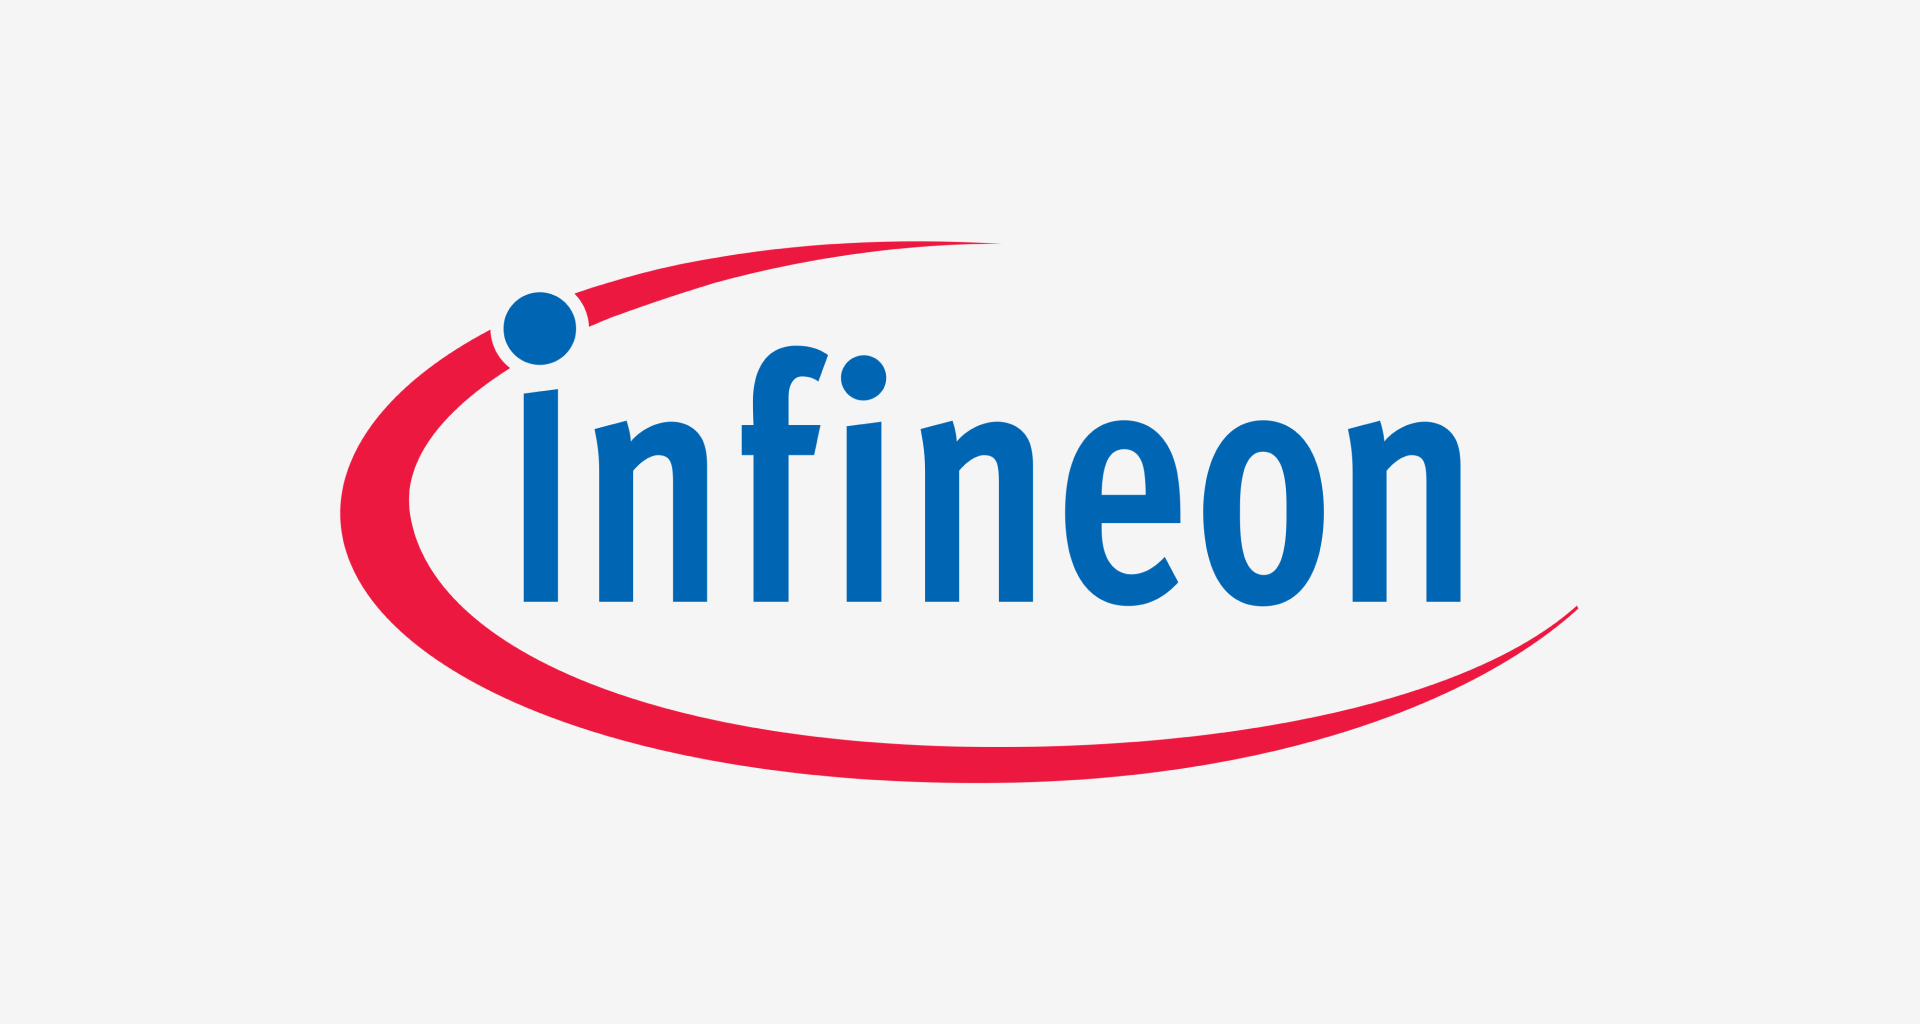 The image shows the Infineon Technologies logo, with "infineon" written in blue lowercase letters and a red swoosh encircling the top left and bottom right.